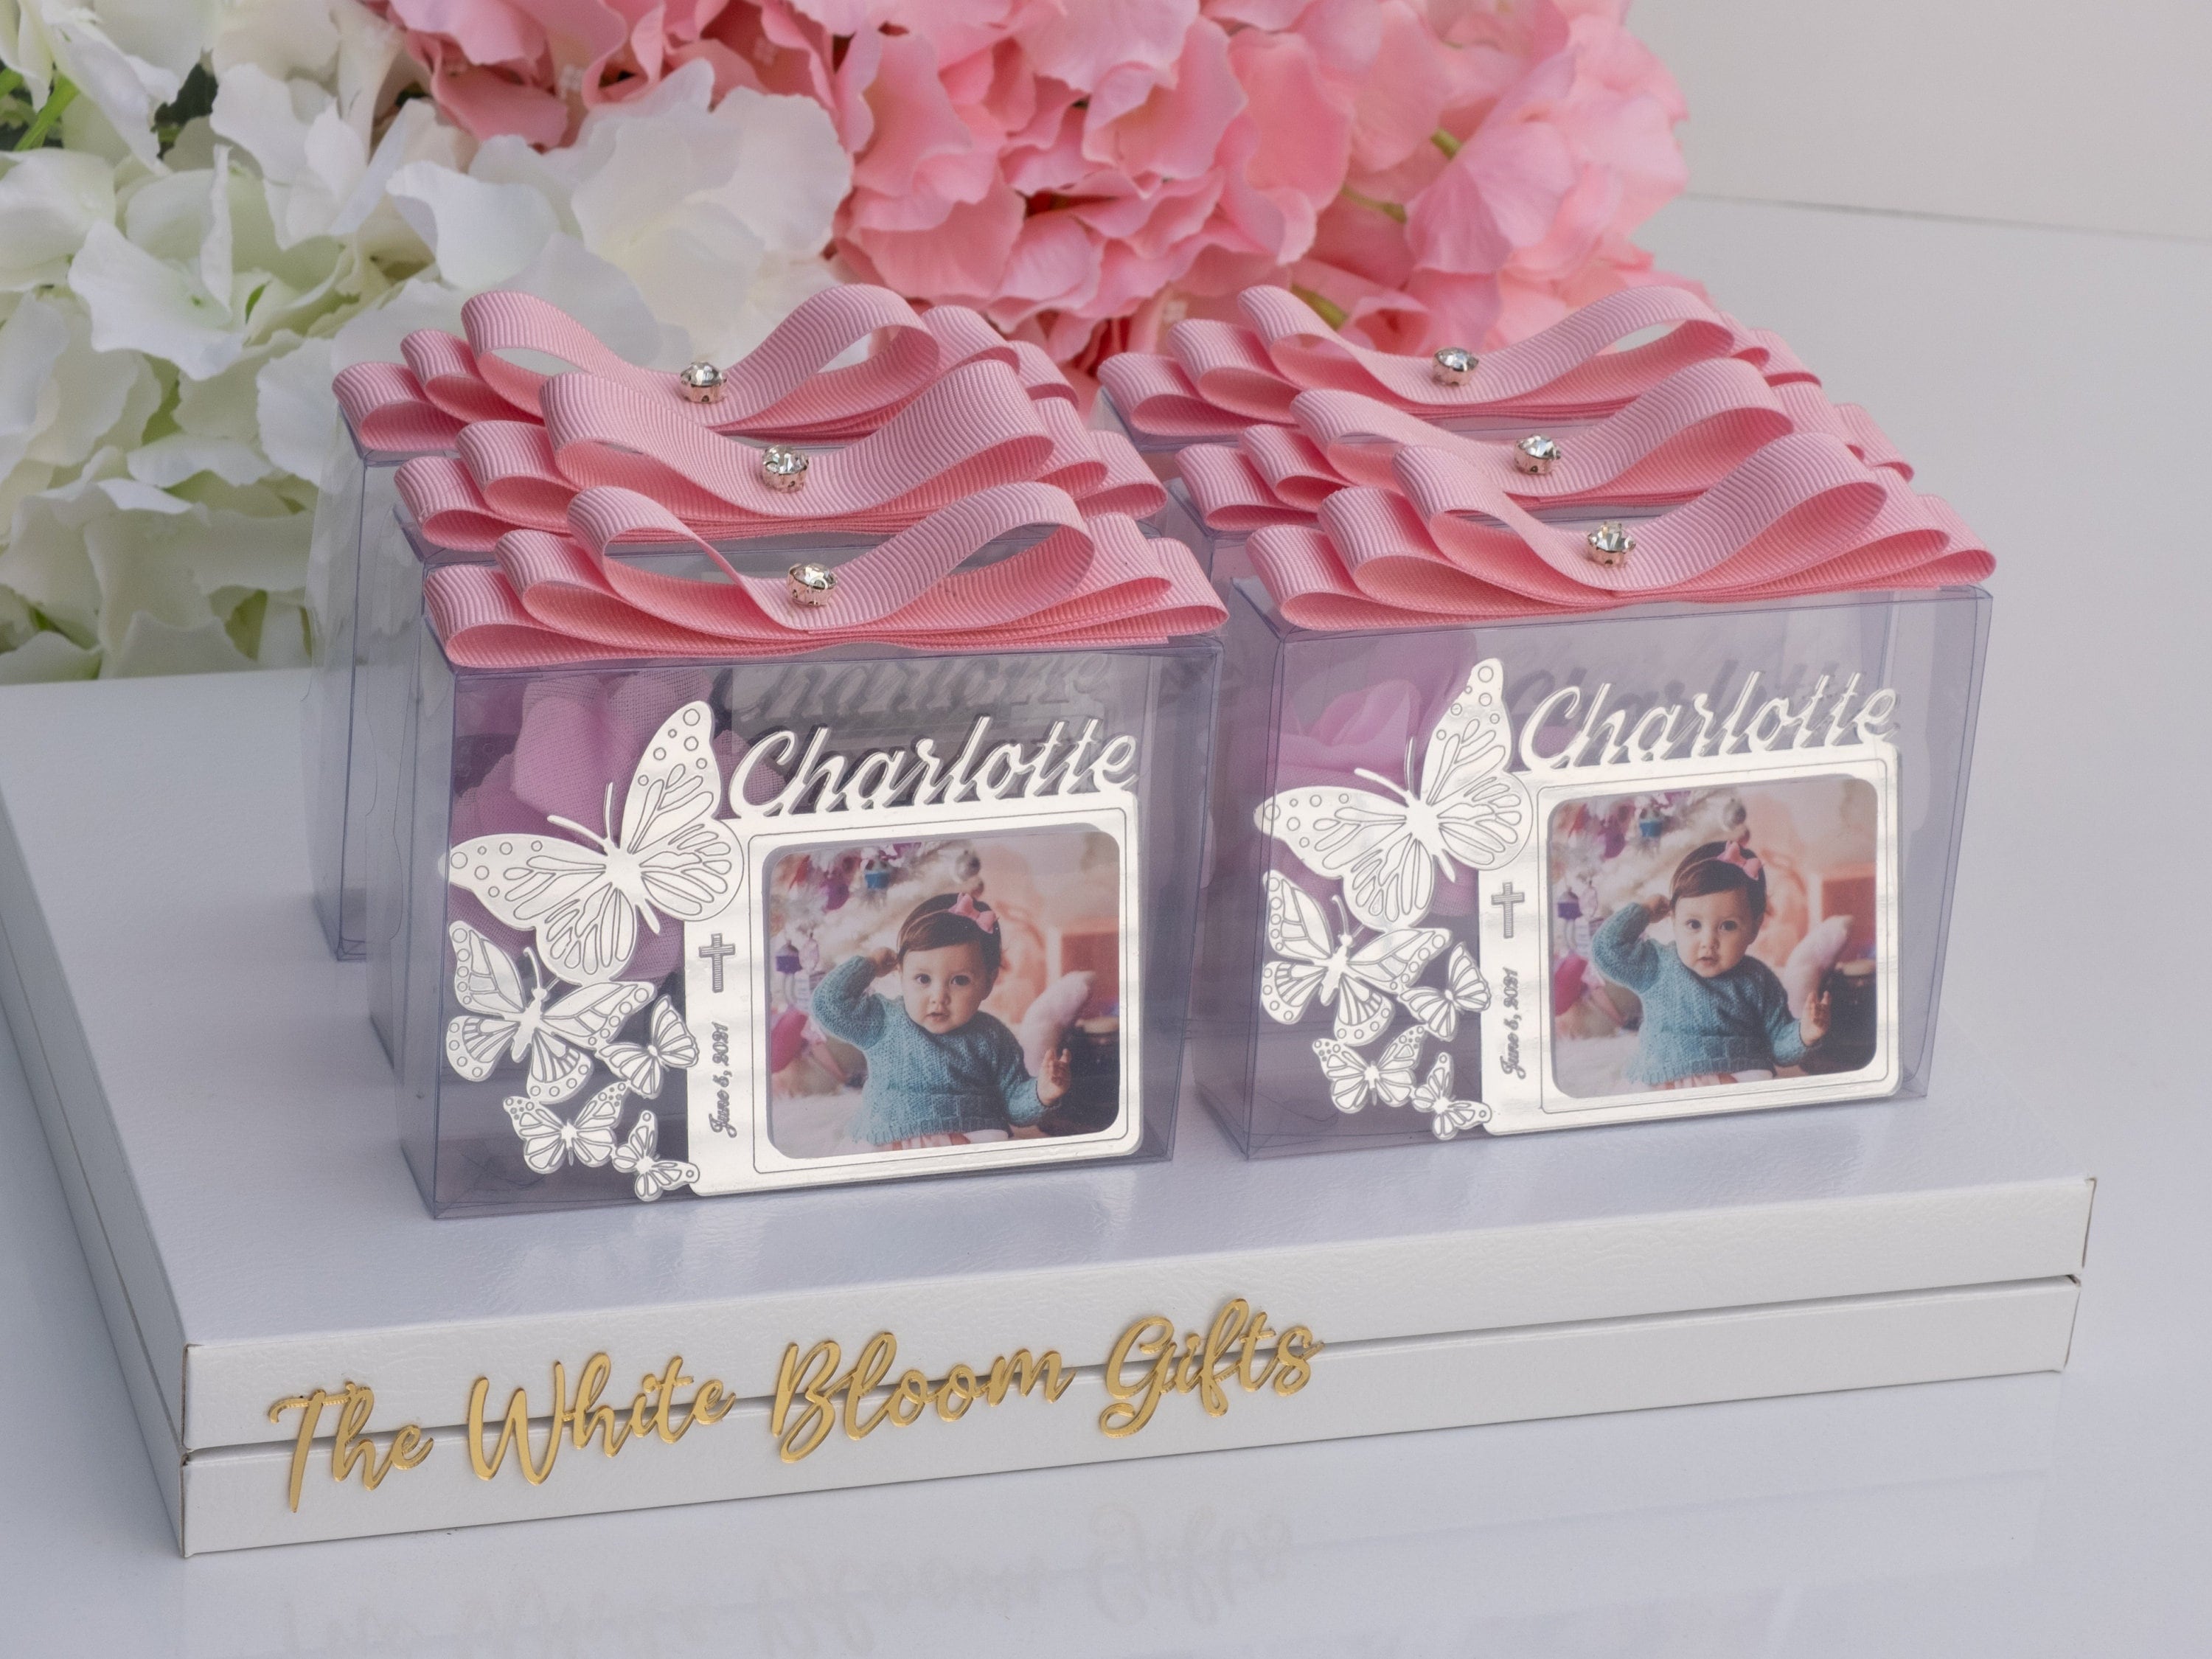 5 Photo Frames 4x6 Colored Flexible Plastic Picture Frames Party Favors  Wedding, Shower Gifts Magnet or Easel Back 